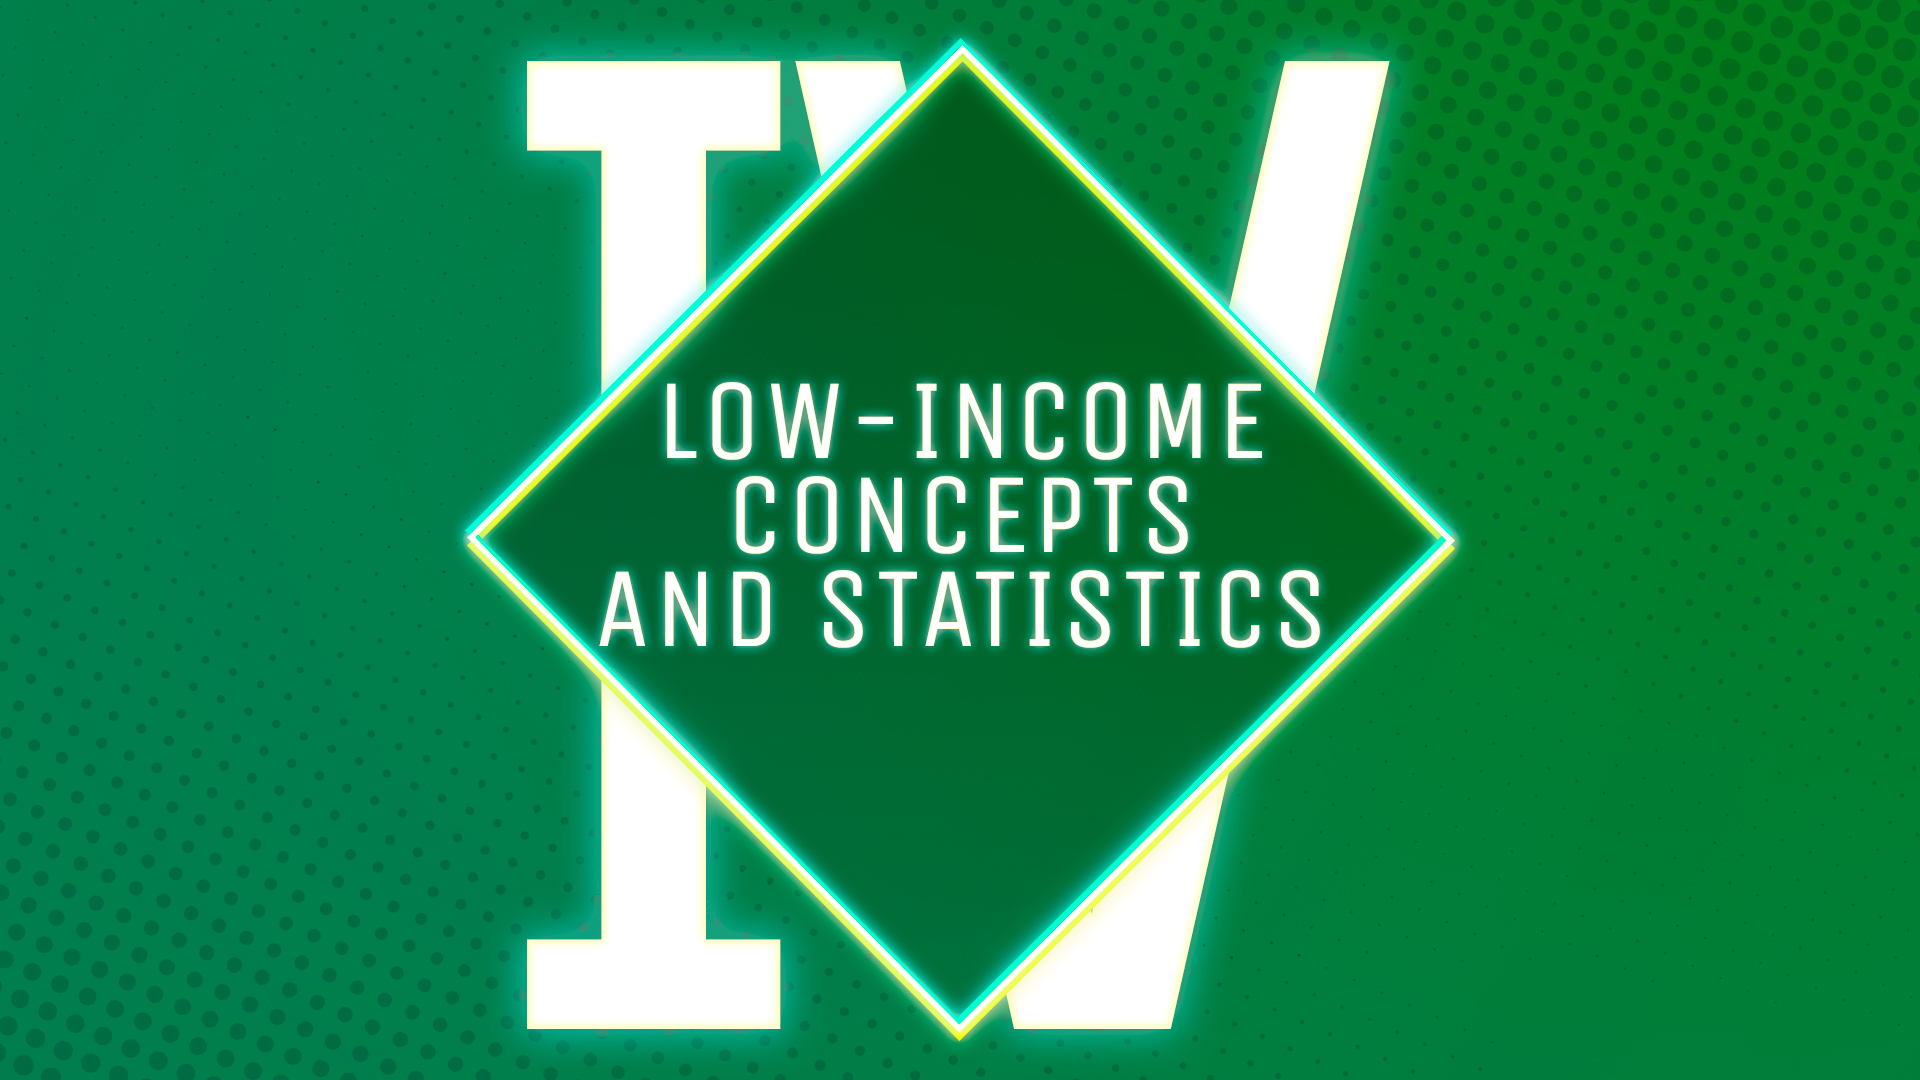 Low-income concepts and statistics, 2021 Census of Population